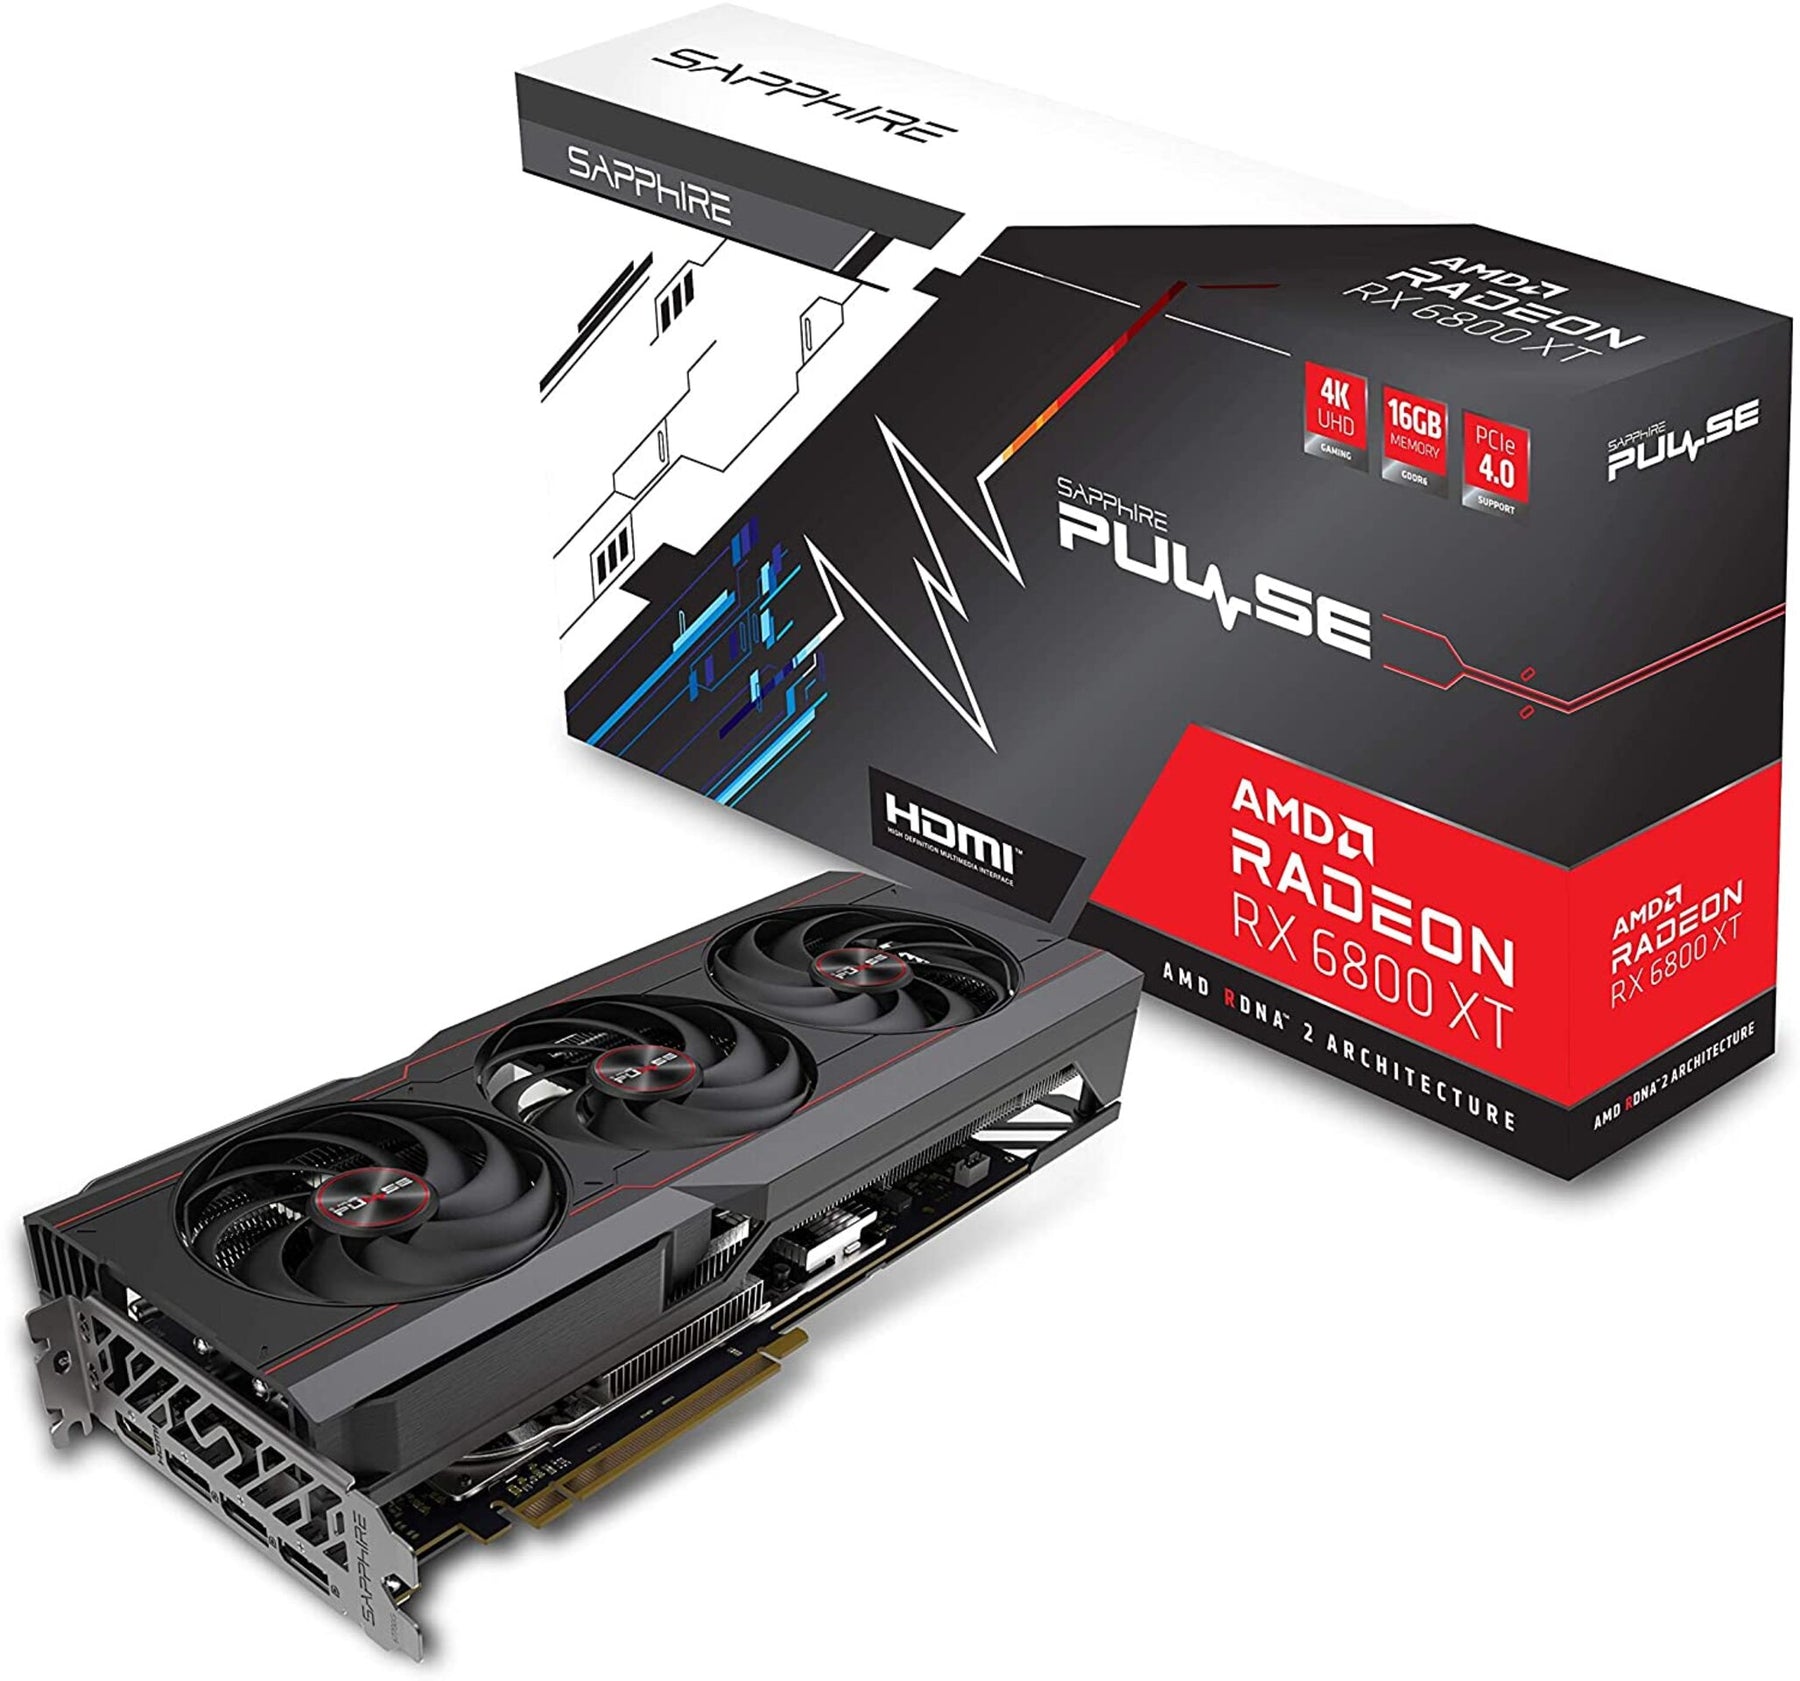 Is the AMD Radeon RX 6800 XT worth buying in September 2022?